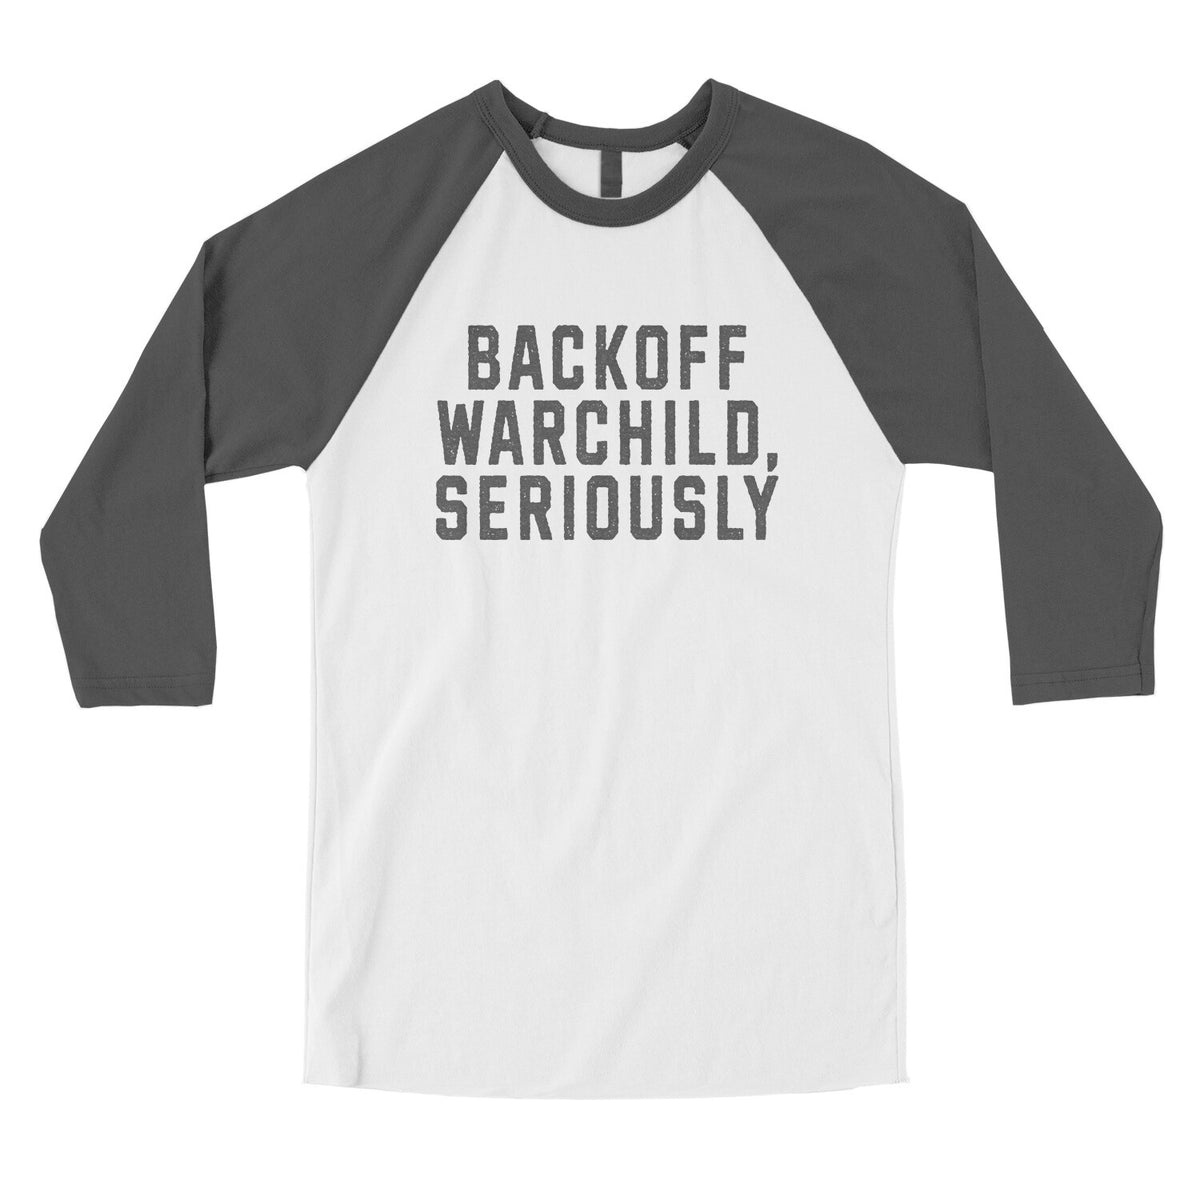 Backoff Warchild Seriously in White with Asphalt Color